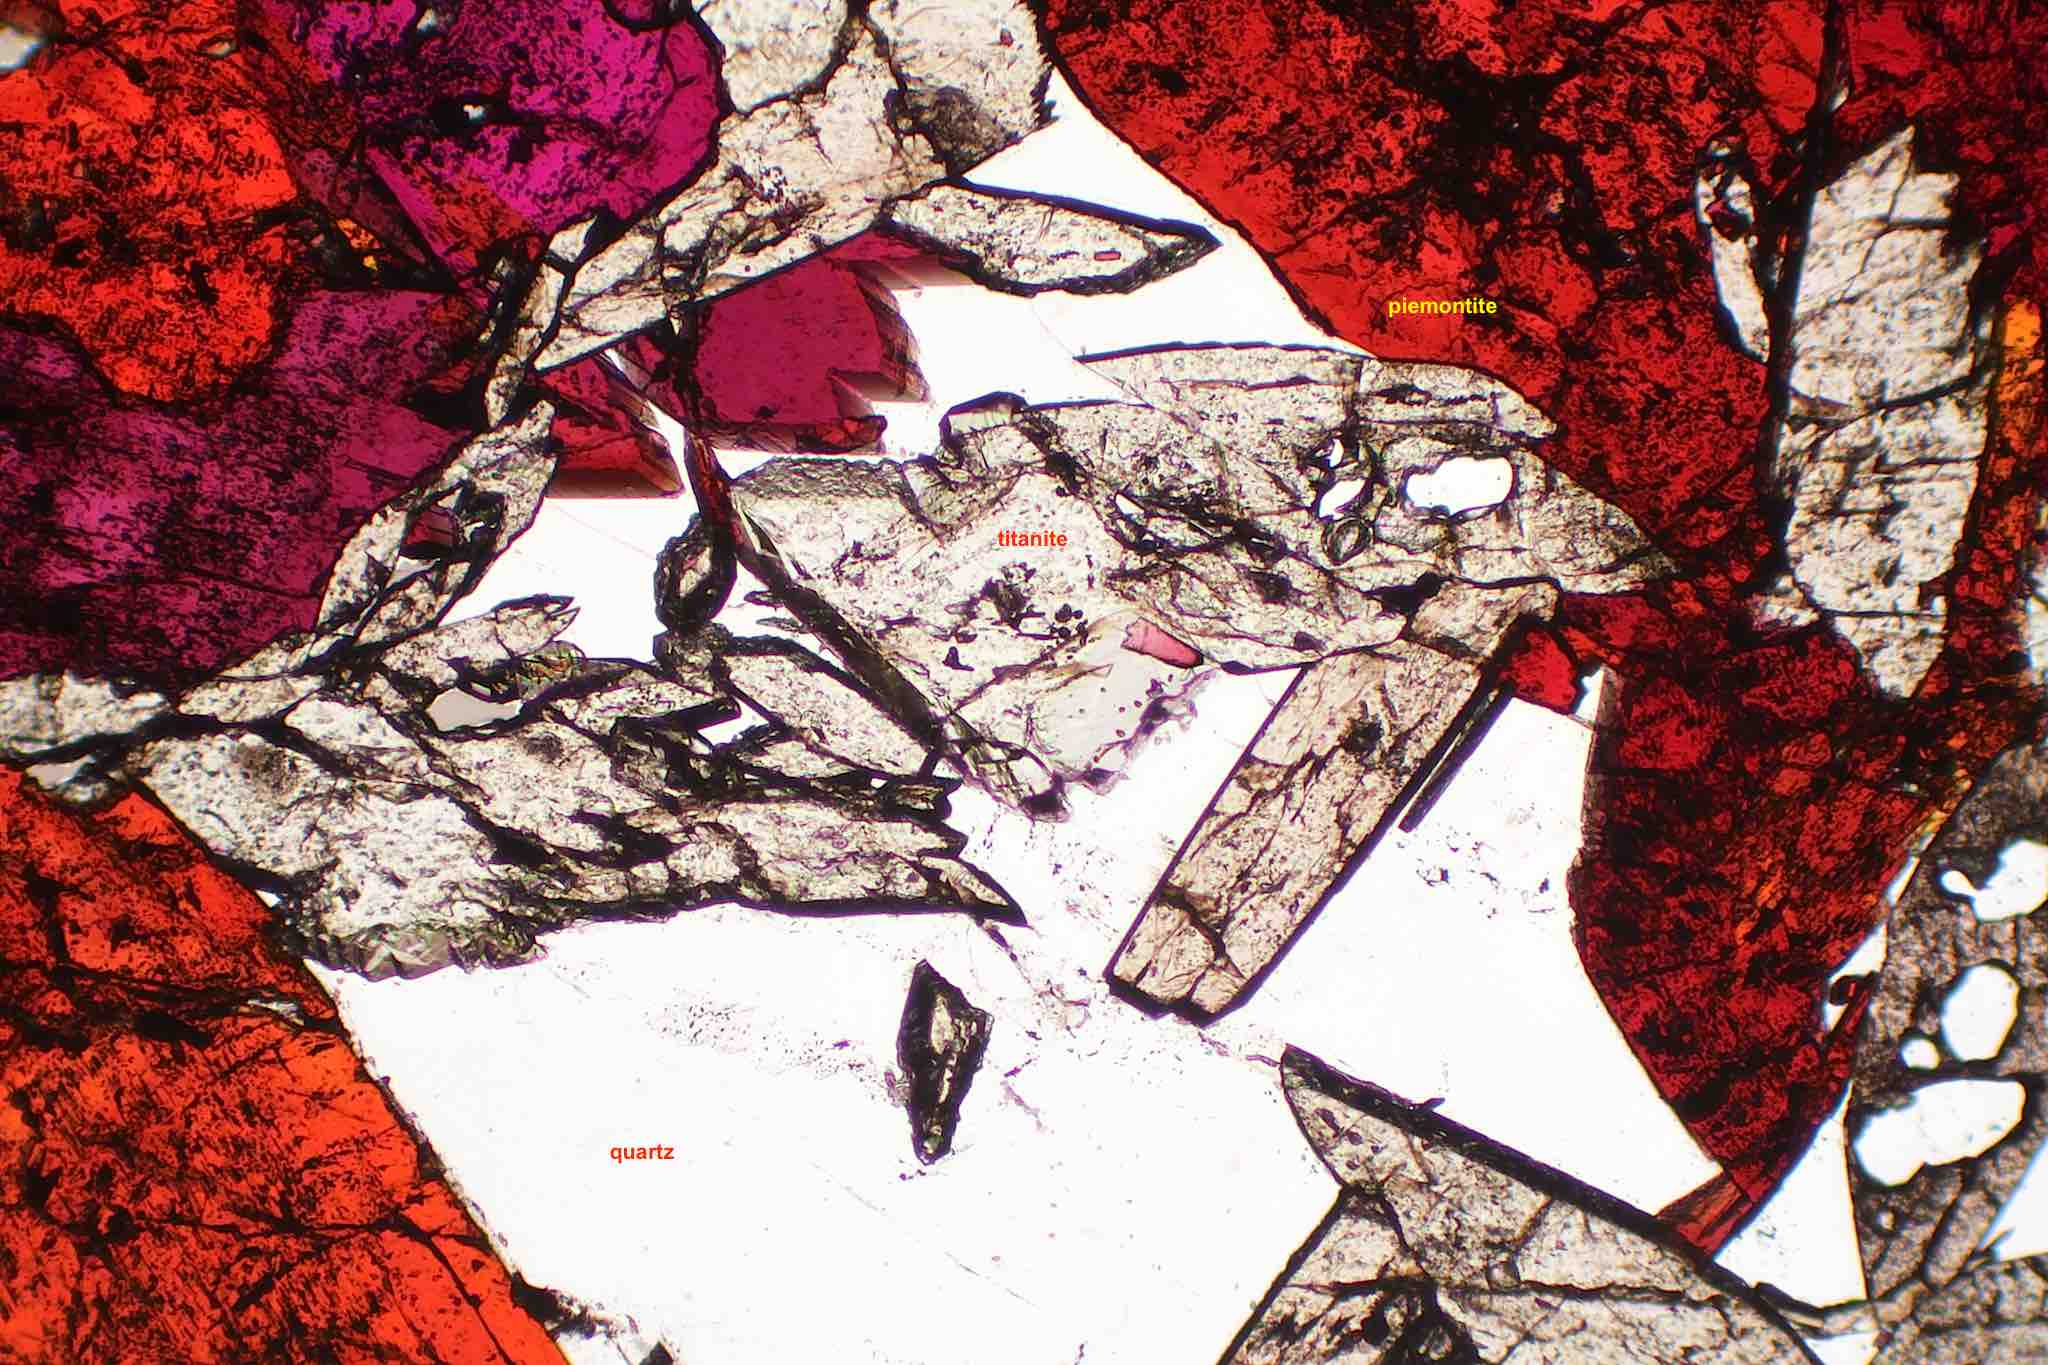 St Marcel Italy piemontite in thin section